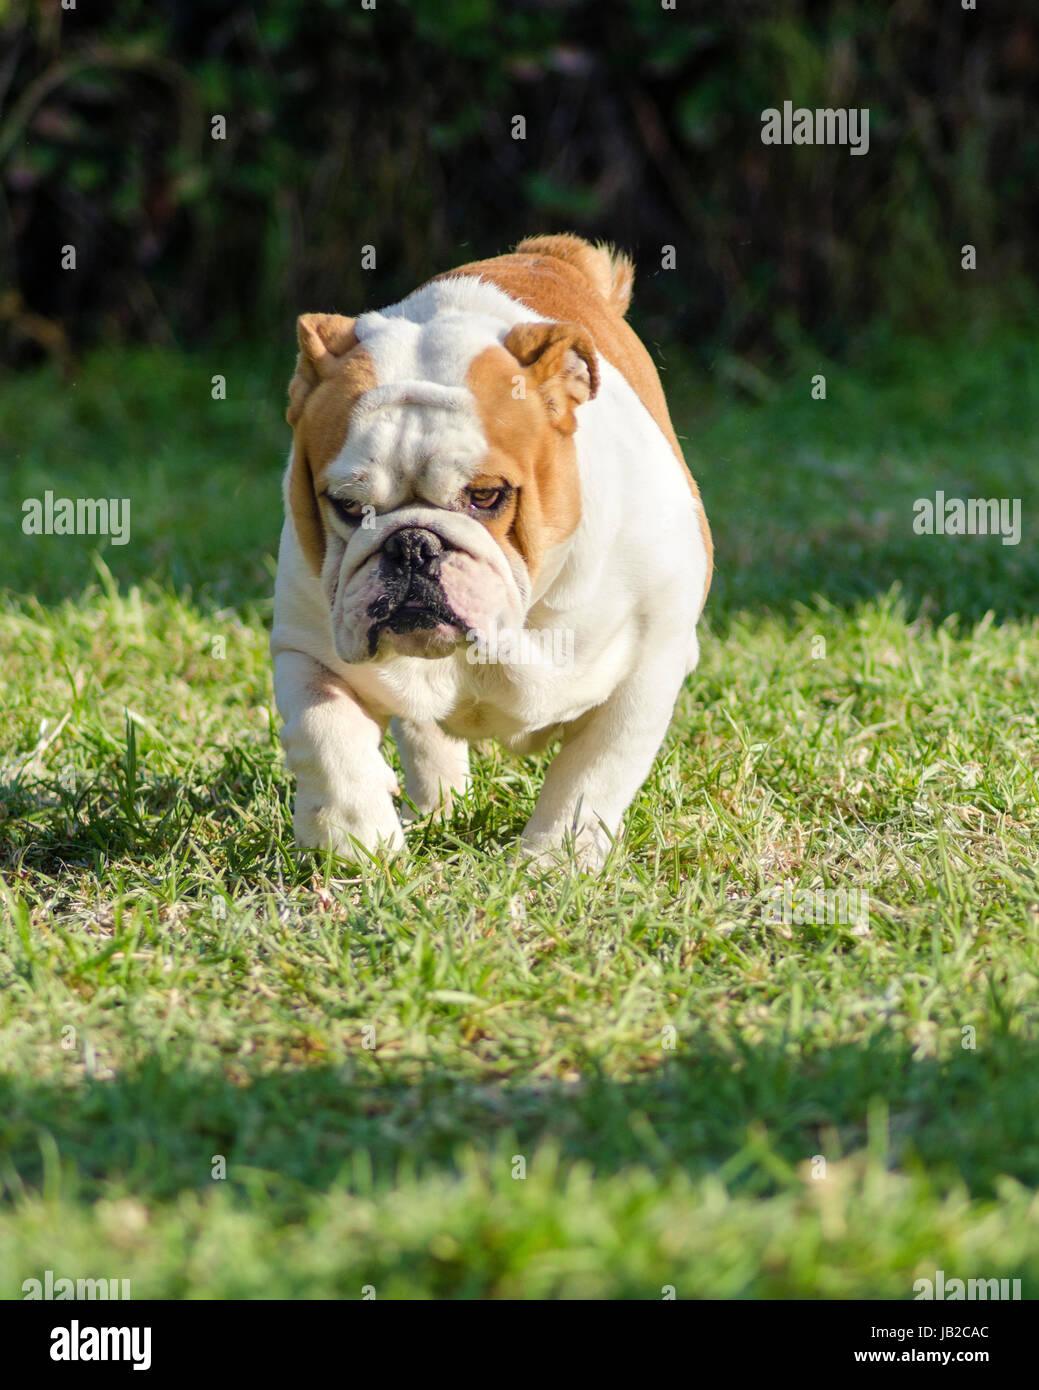 A small, young, beautiful, brown and white English Bulldog running on the lawn looking playful and cheerful. The Bulldog is a muscular, heavy dog with a wrinkled face and a distinctive pushed-in nose. Stock Photo